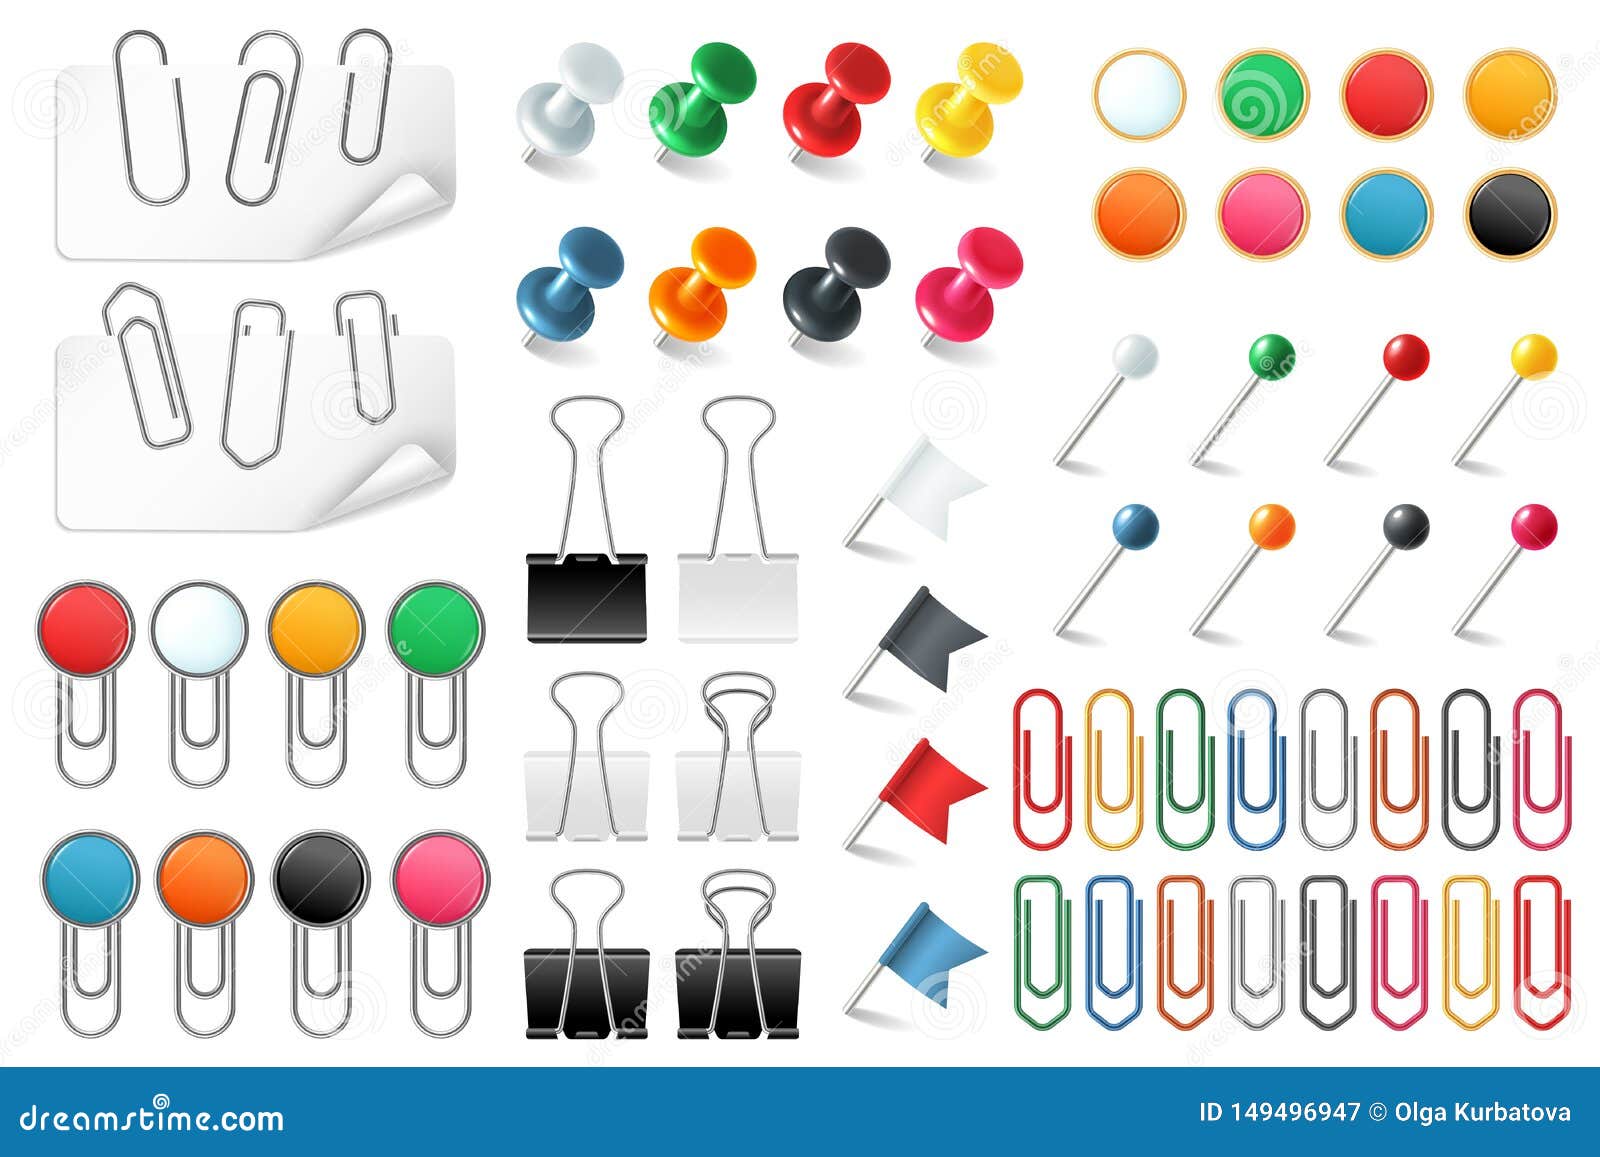 pins paper clips. push pins fasteners staple tack pin colored paper clip office organized announcement, realistic 